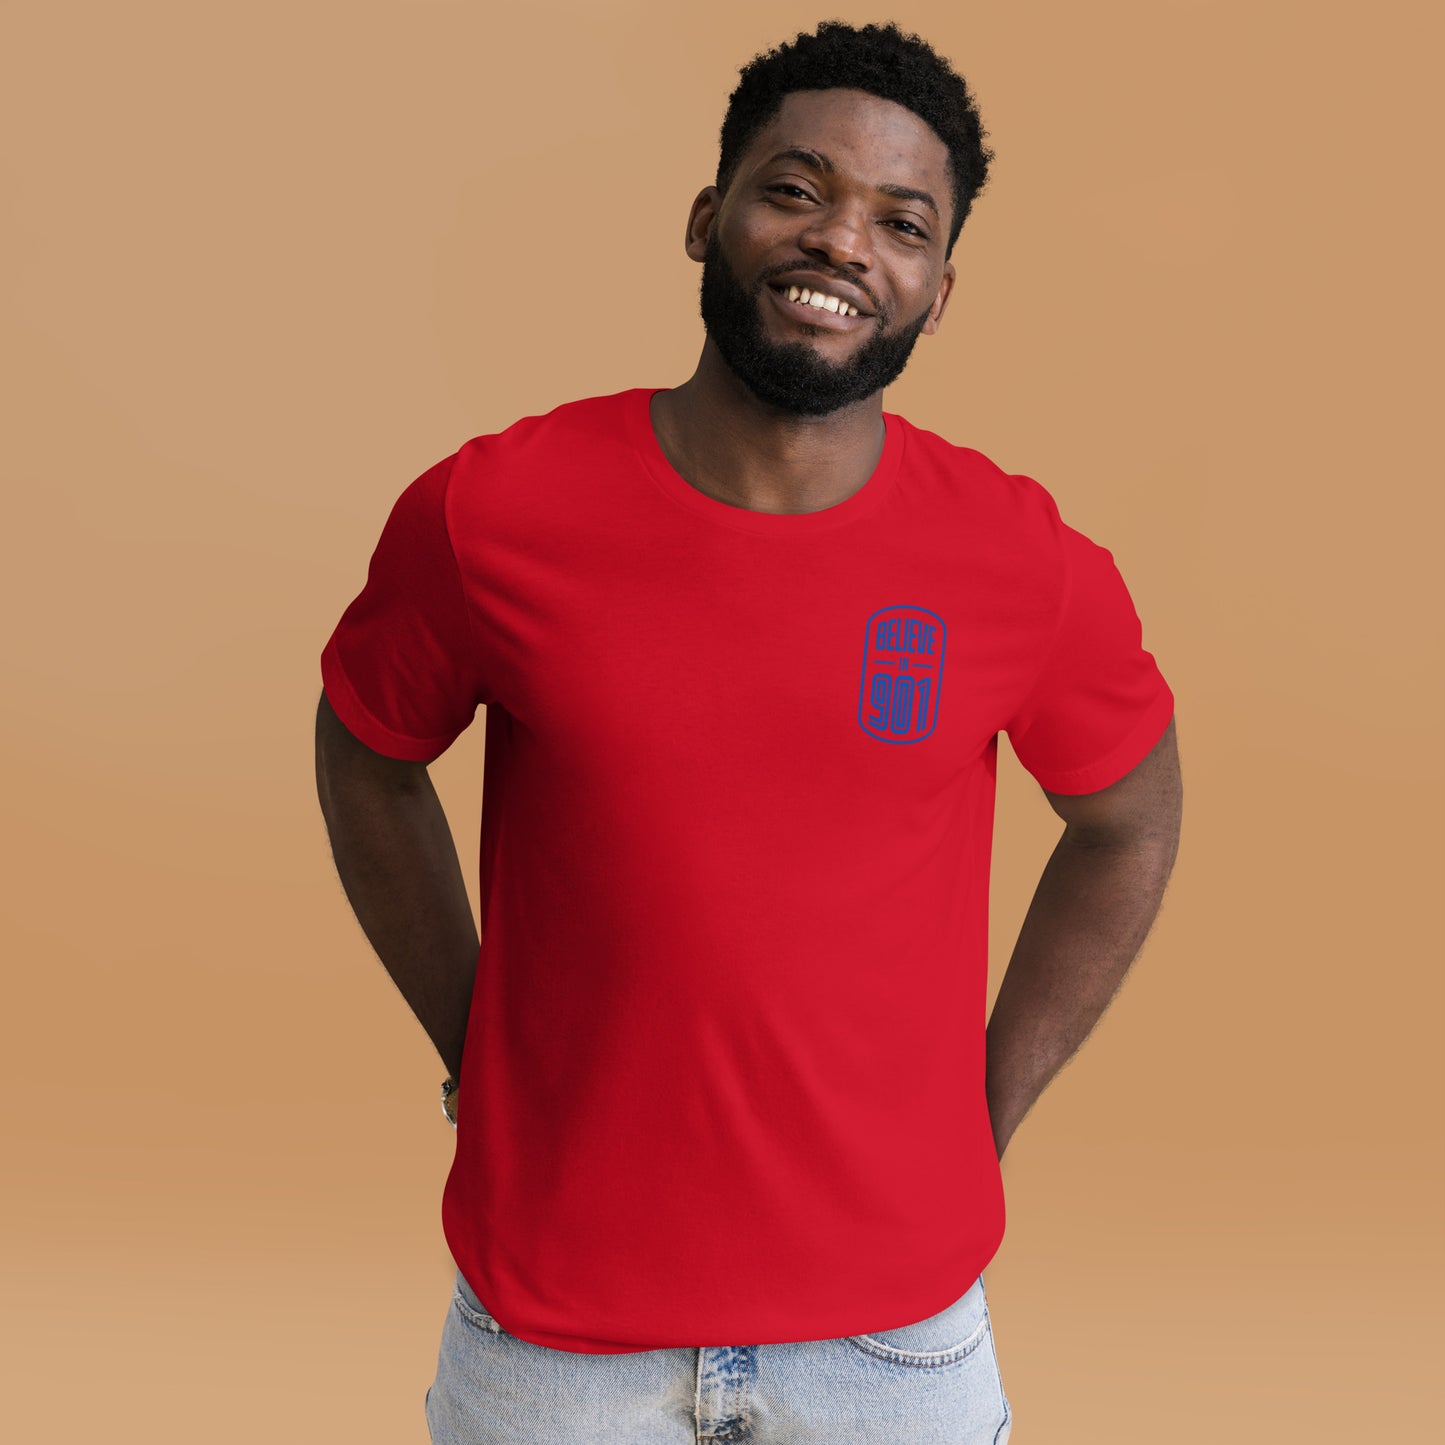 Believe in 901 T Shirt (Red and Blue)